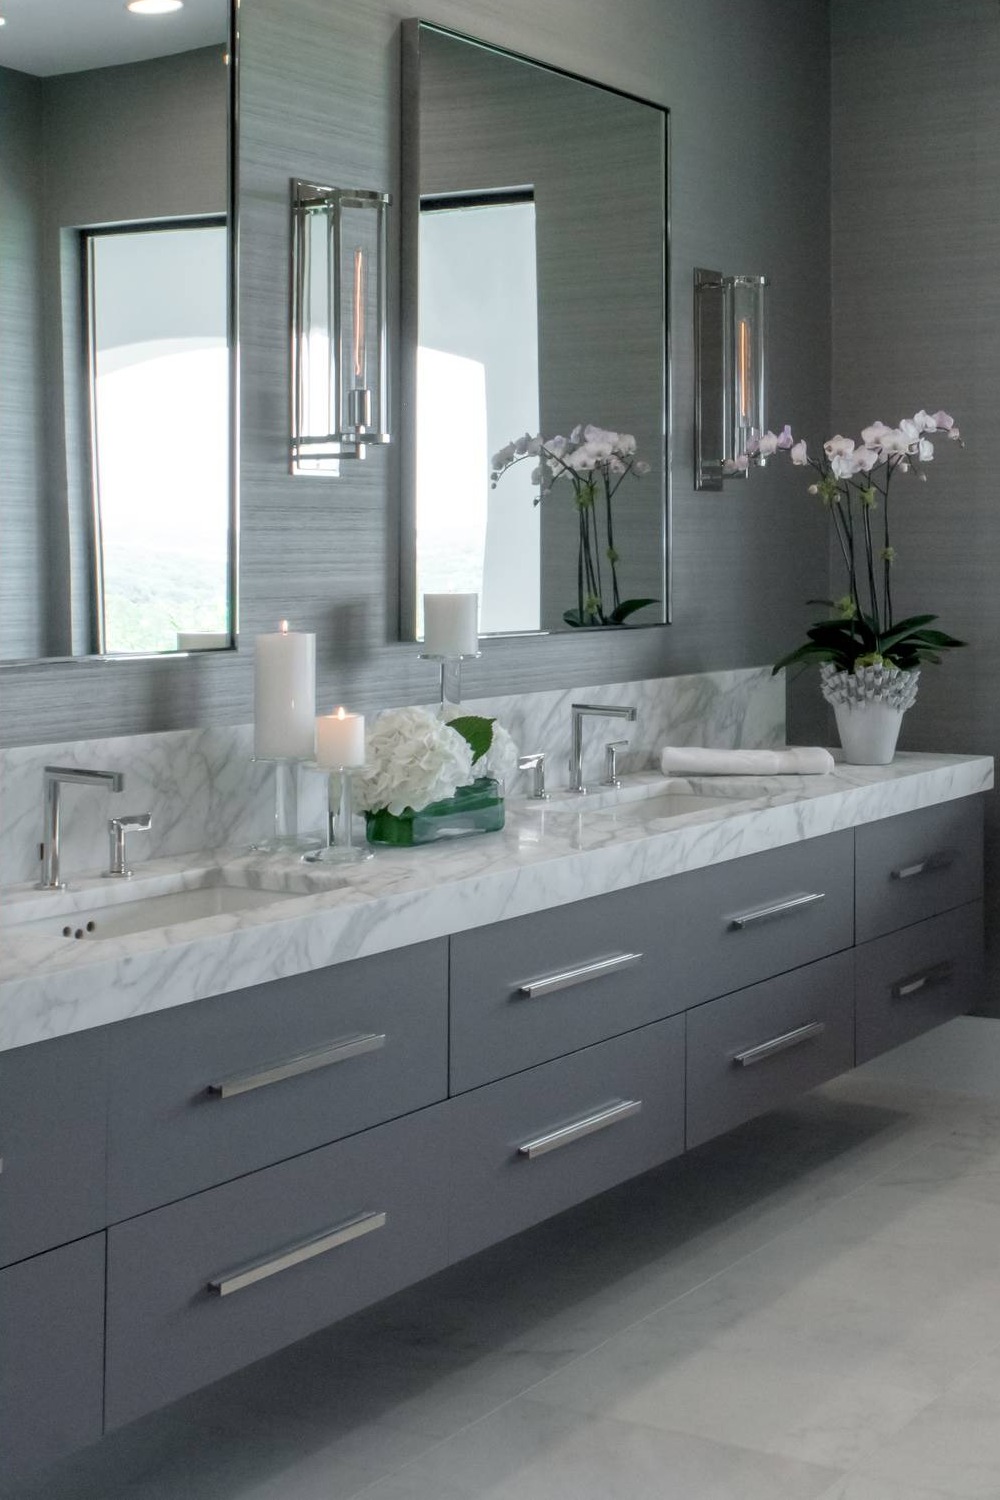 Gray Flat Panel Cabinets Porcelain Tiles Walls White Marble Countertop